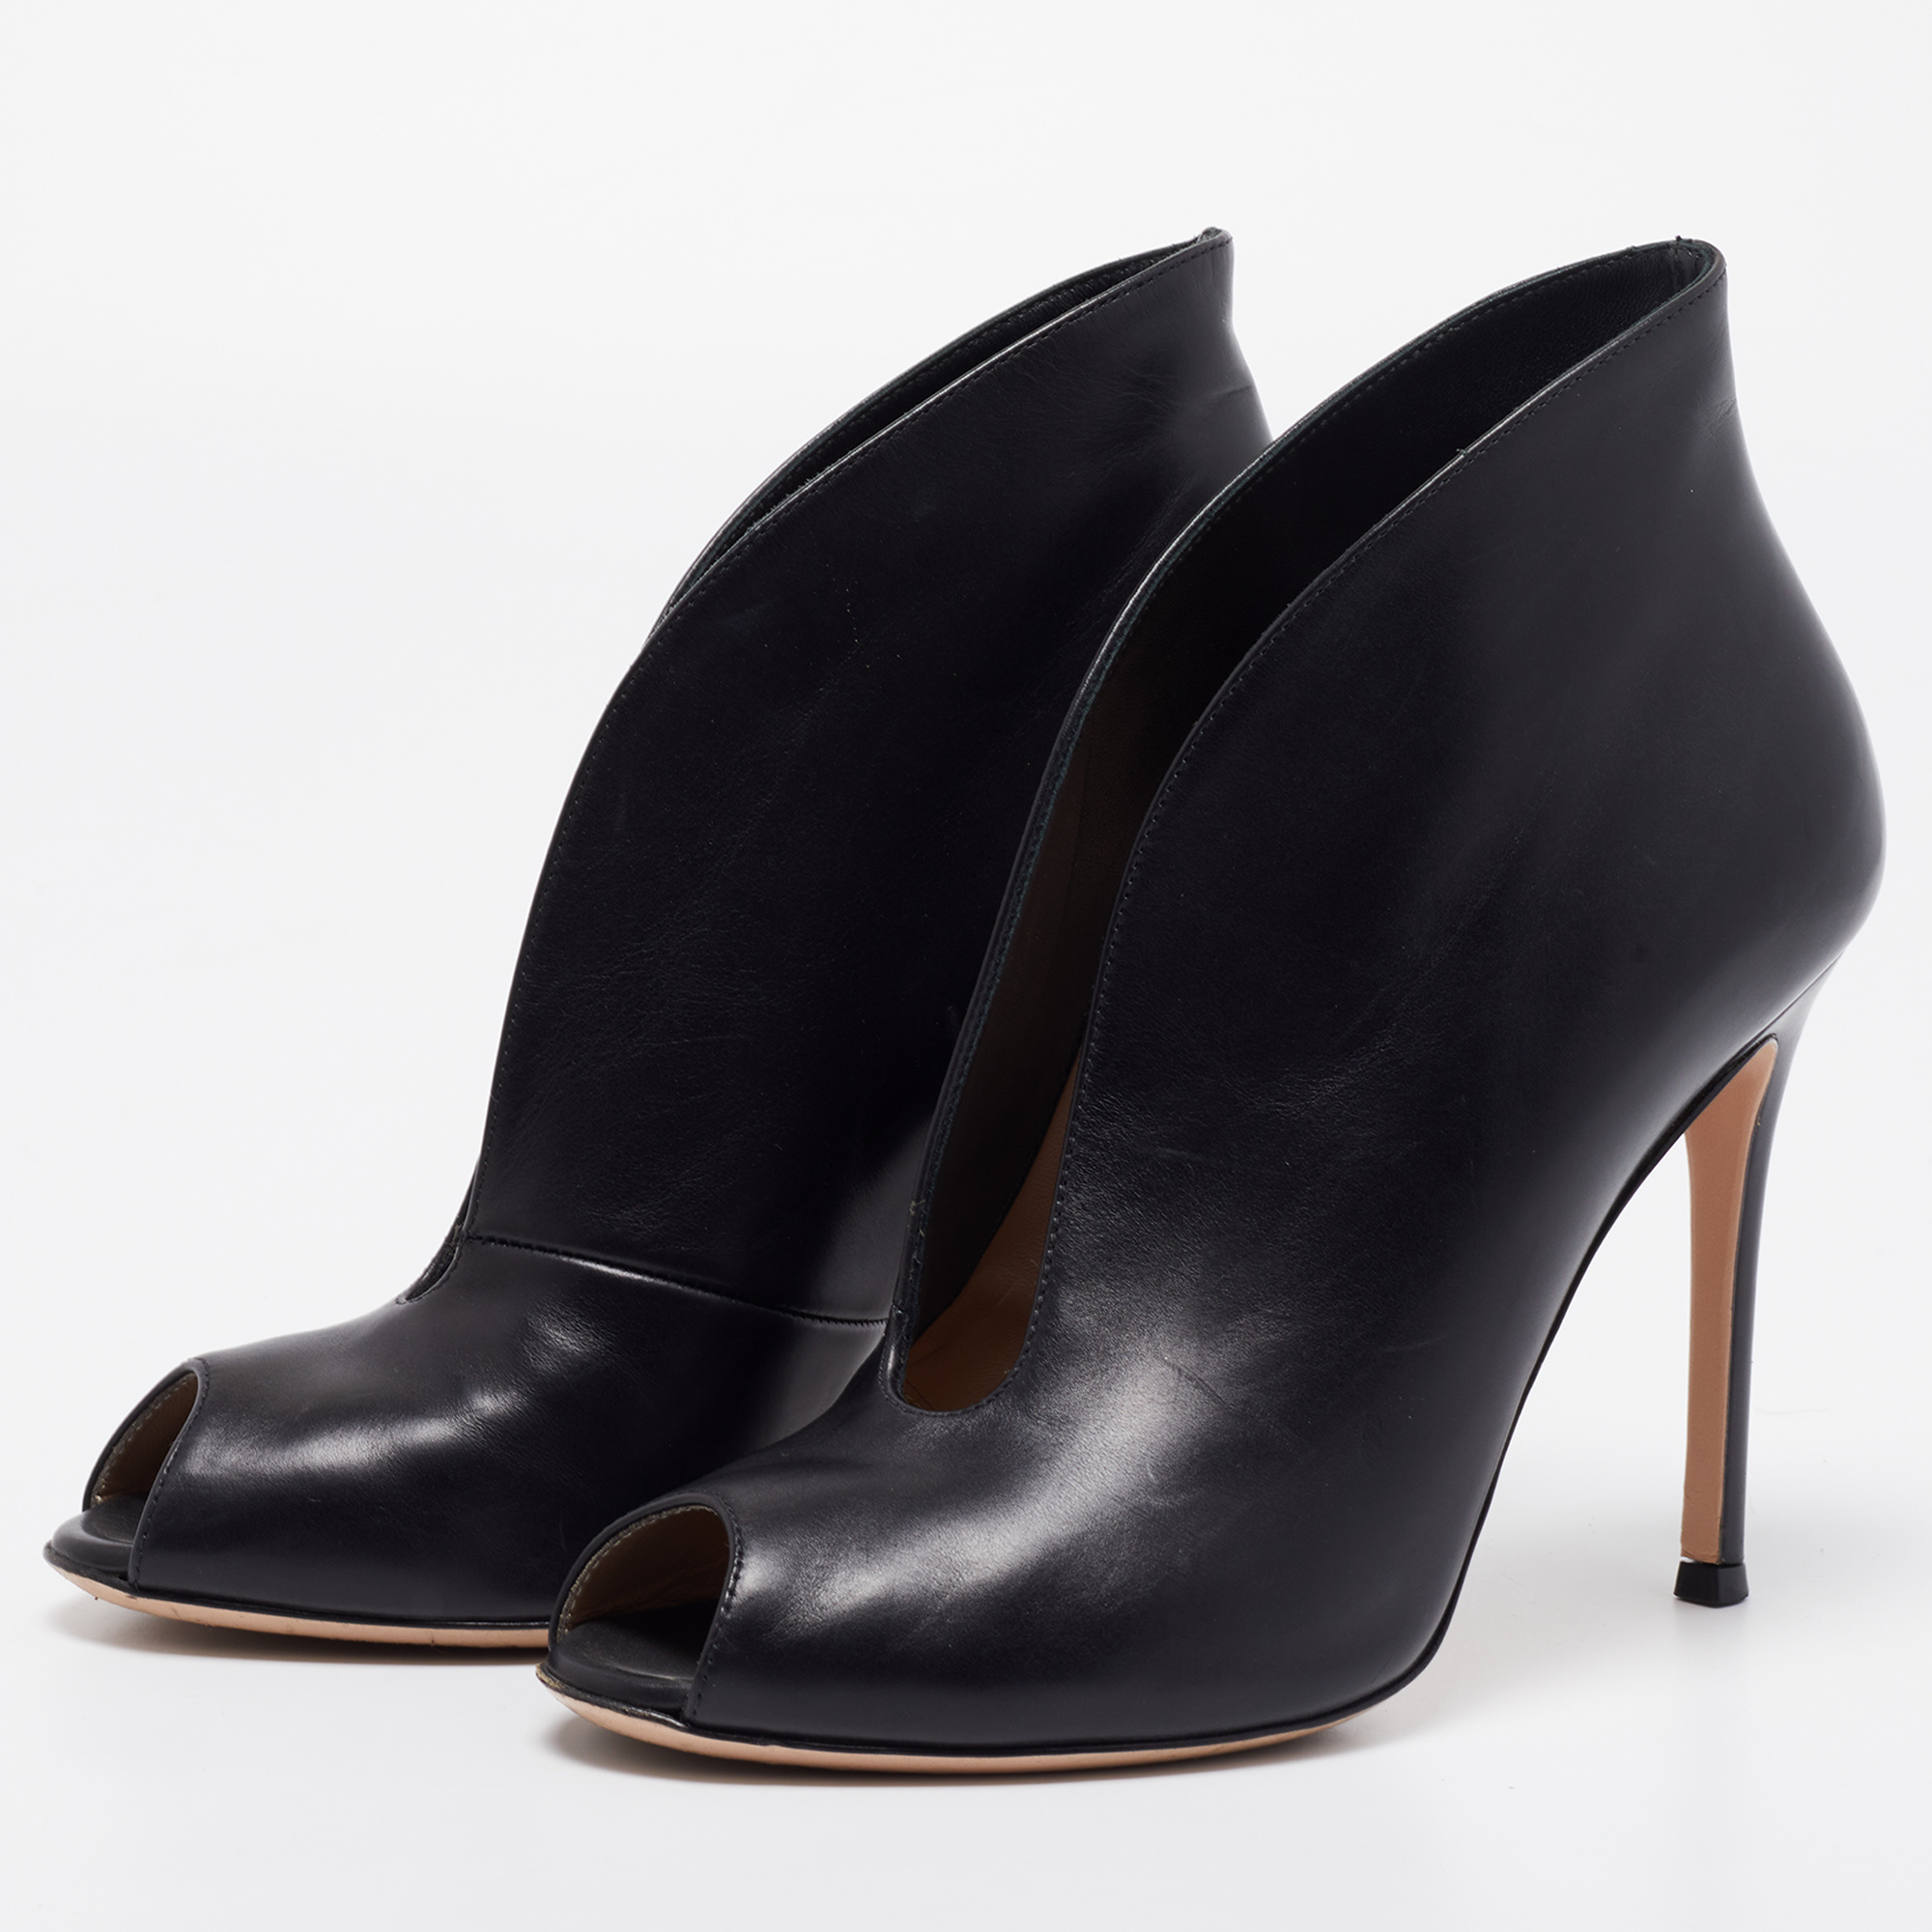 

Gianvito Rossi Black Leather Peep Toe Vamp Ankle Booties Size